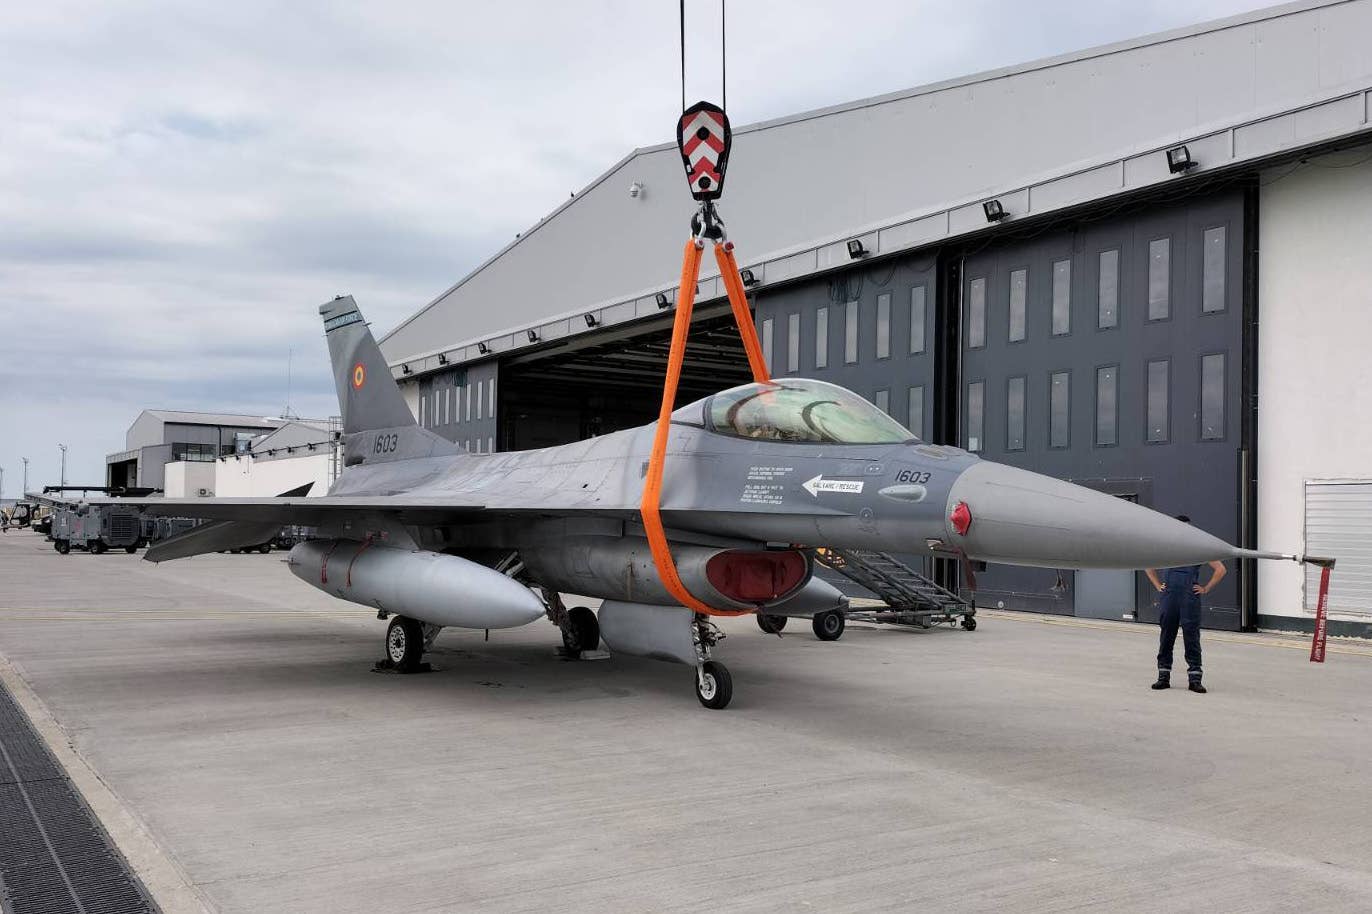 U.S. airmen from the 31st Maintenance Group and maintainers from the Romanian Air Force move an F-16AM at the 86th Air Base in Borcea, Romania, in May 2022. <em>via U.S. Air Force</em>